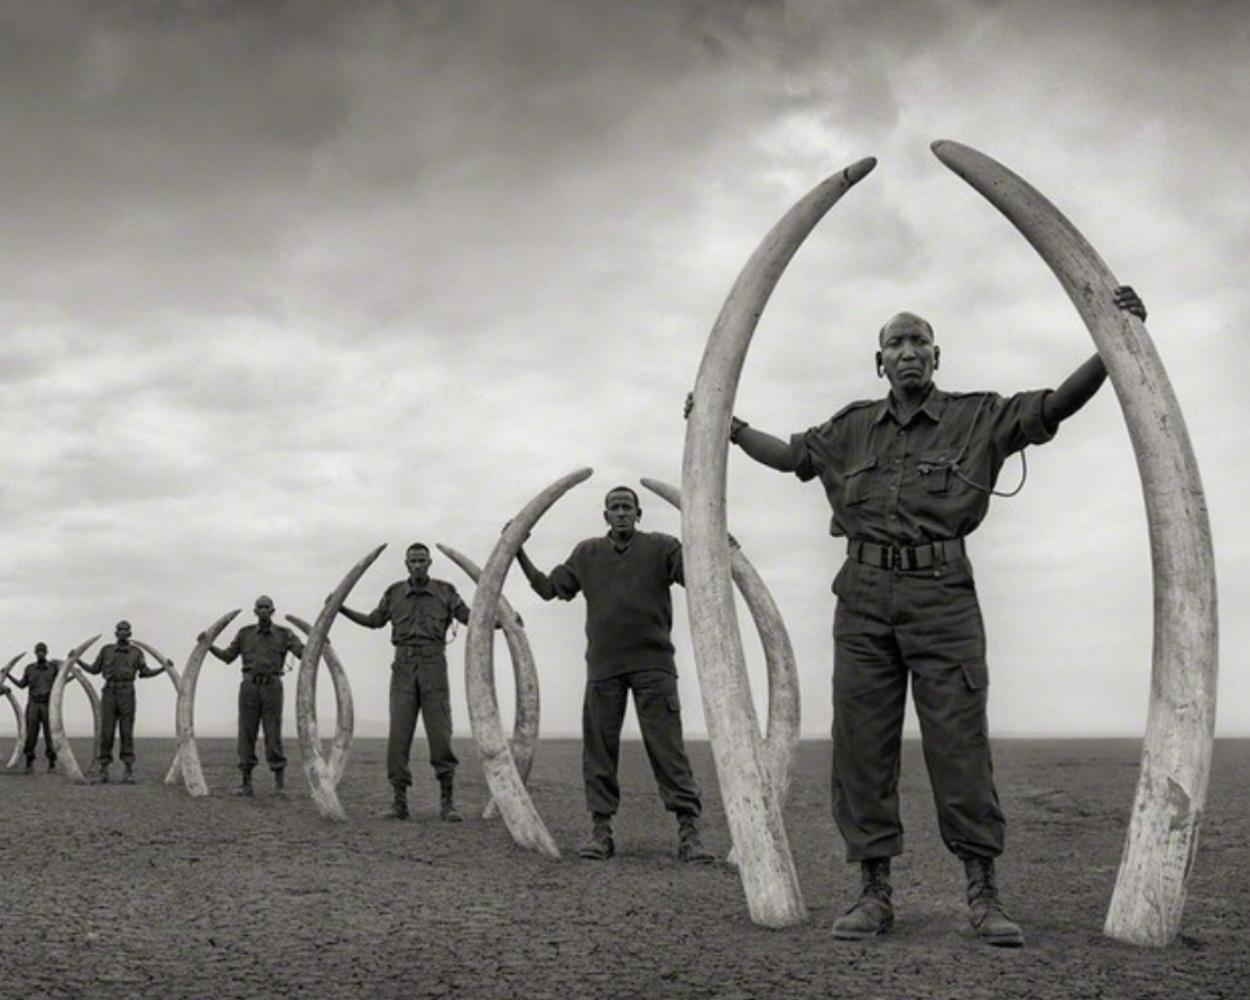 Rangers (Line Of) With Tusks Of Killed – Nick Brandt, Africa, Animal, Elephant 2